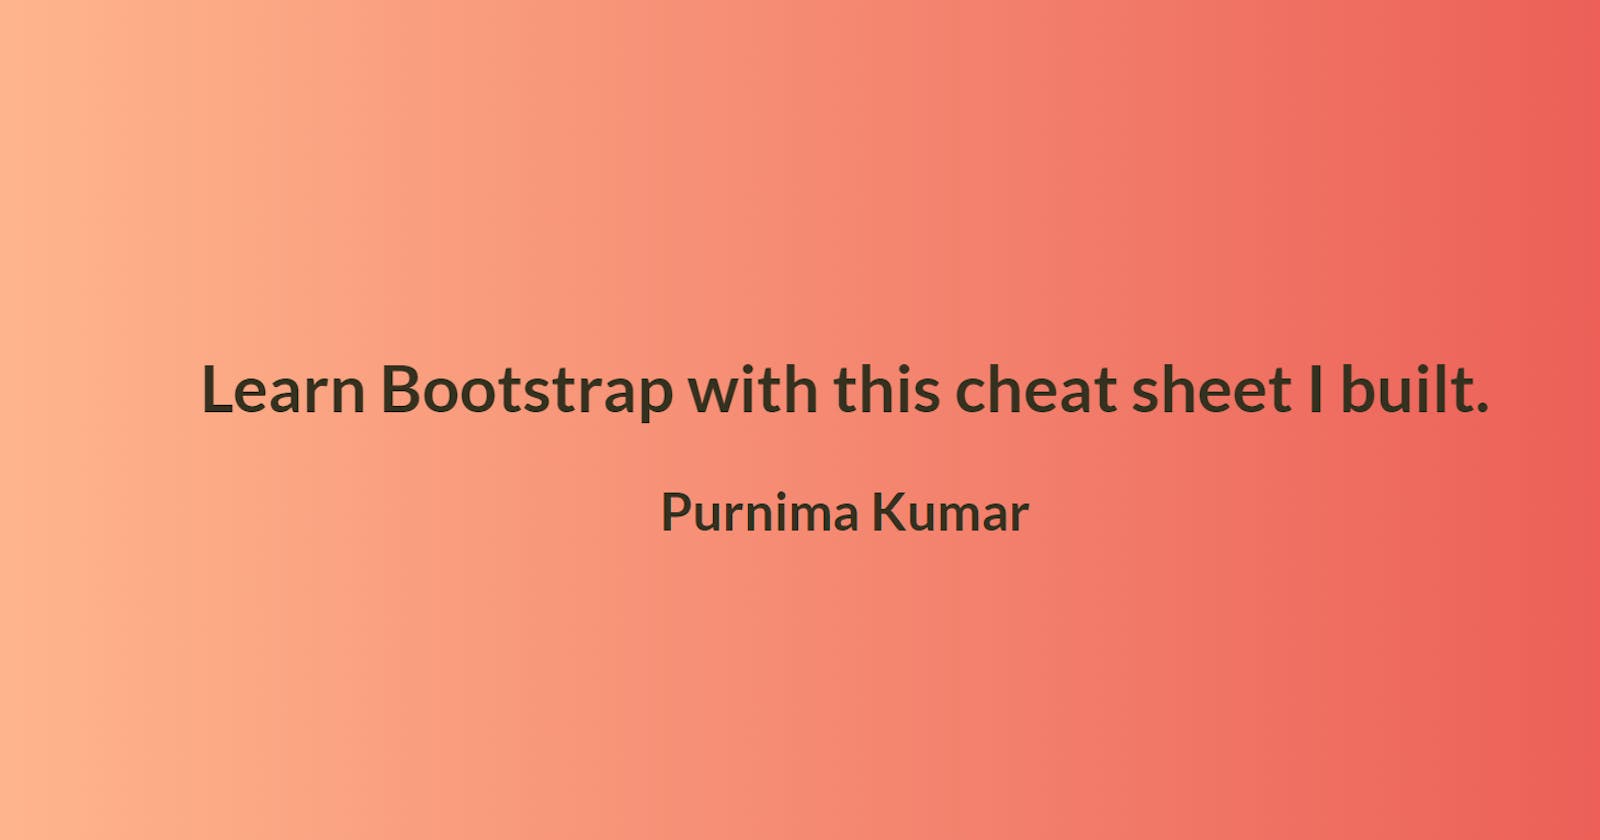 Learn Bootstrap with this cheat sheet I built.